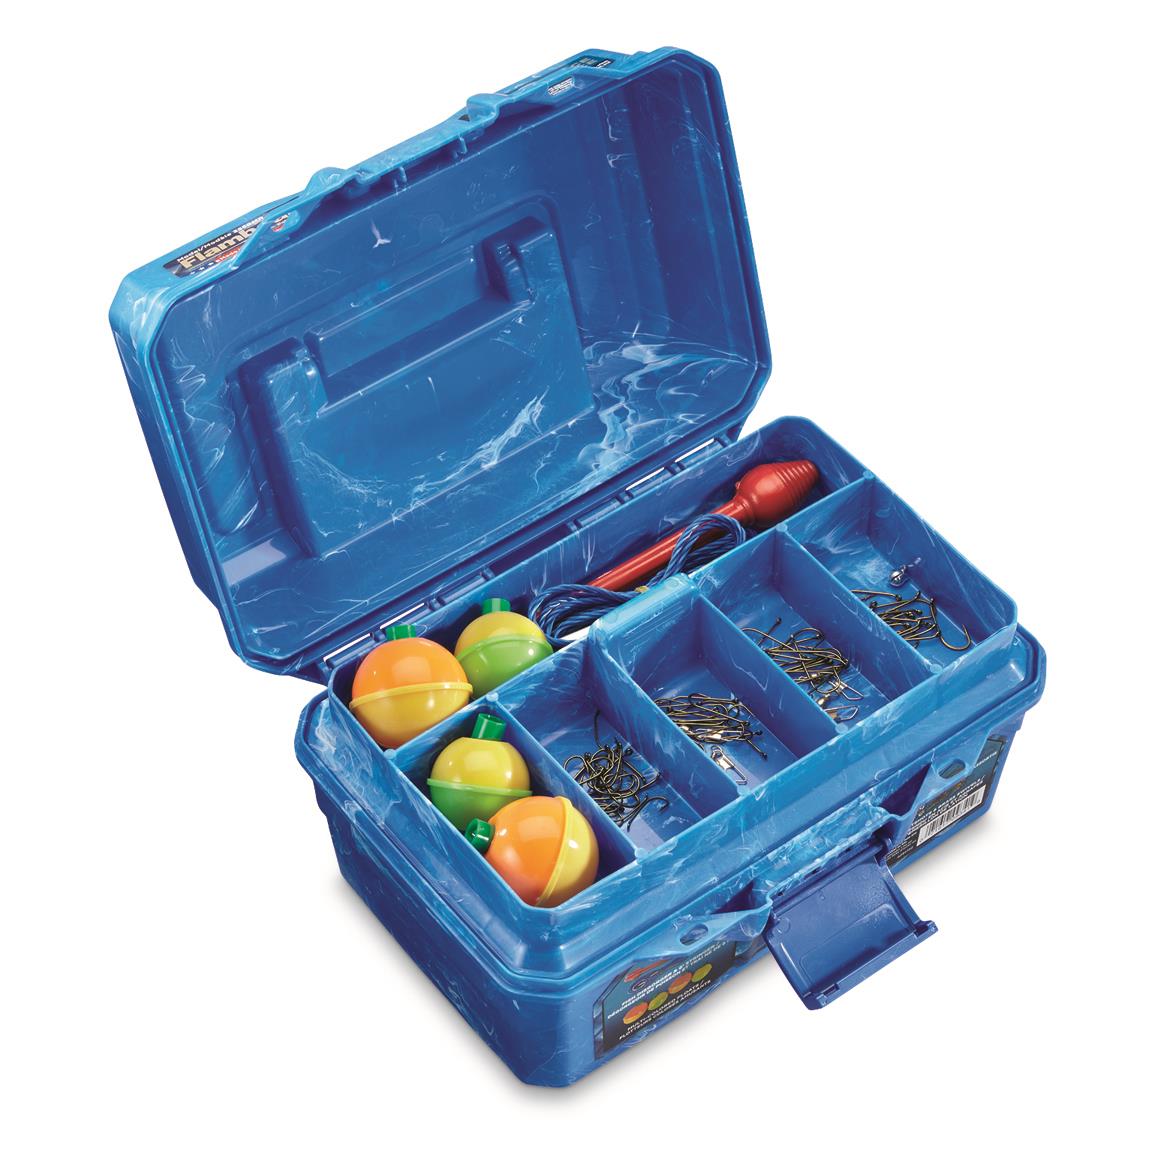 Eagle Claw Lazer Saltwater Go-Fish Tackle Box Kit, 39 Piece - 734318, Tackle  Kits at Sportsman's Guide